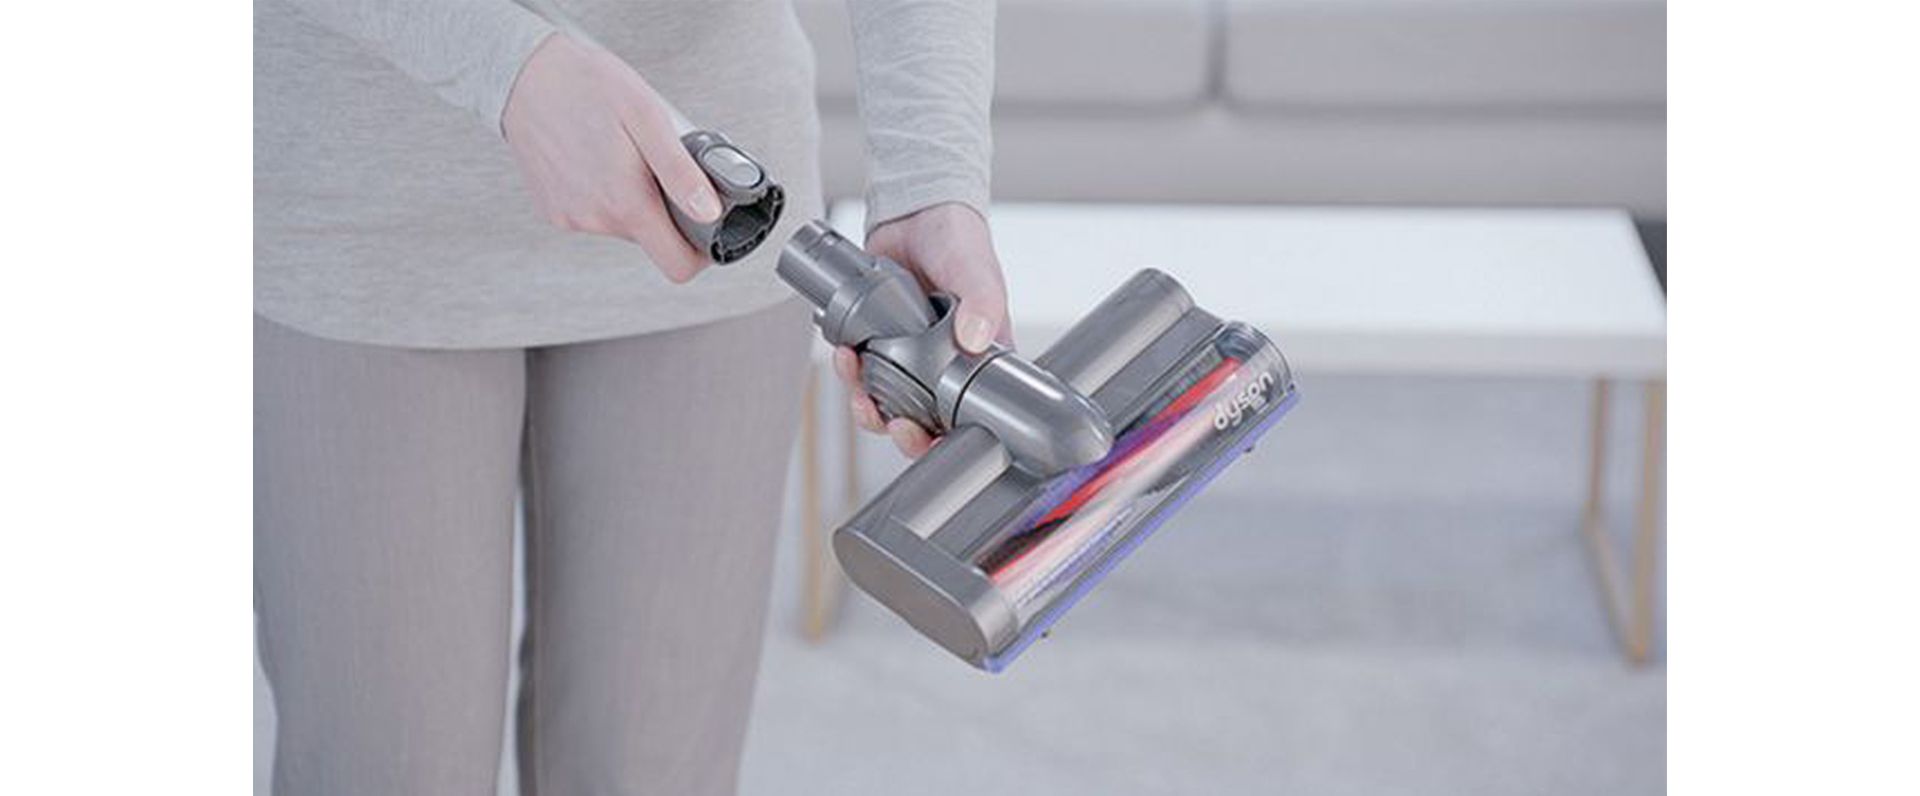 Support and How to Guides for your Dyson V6™ Vacuum